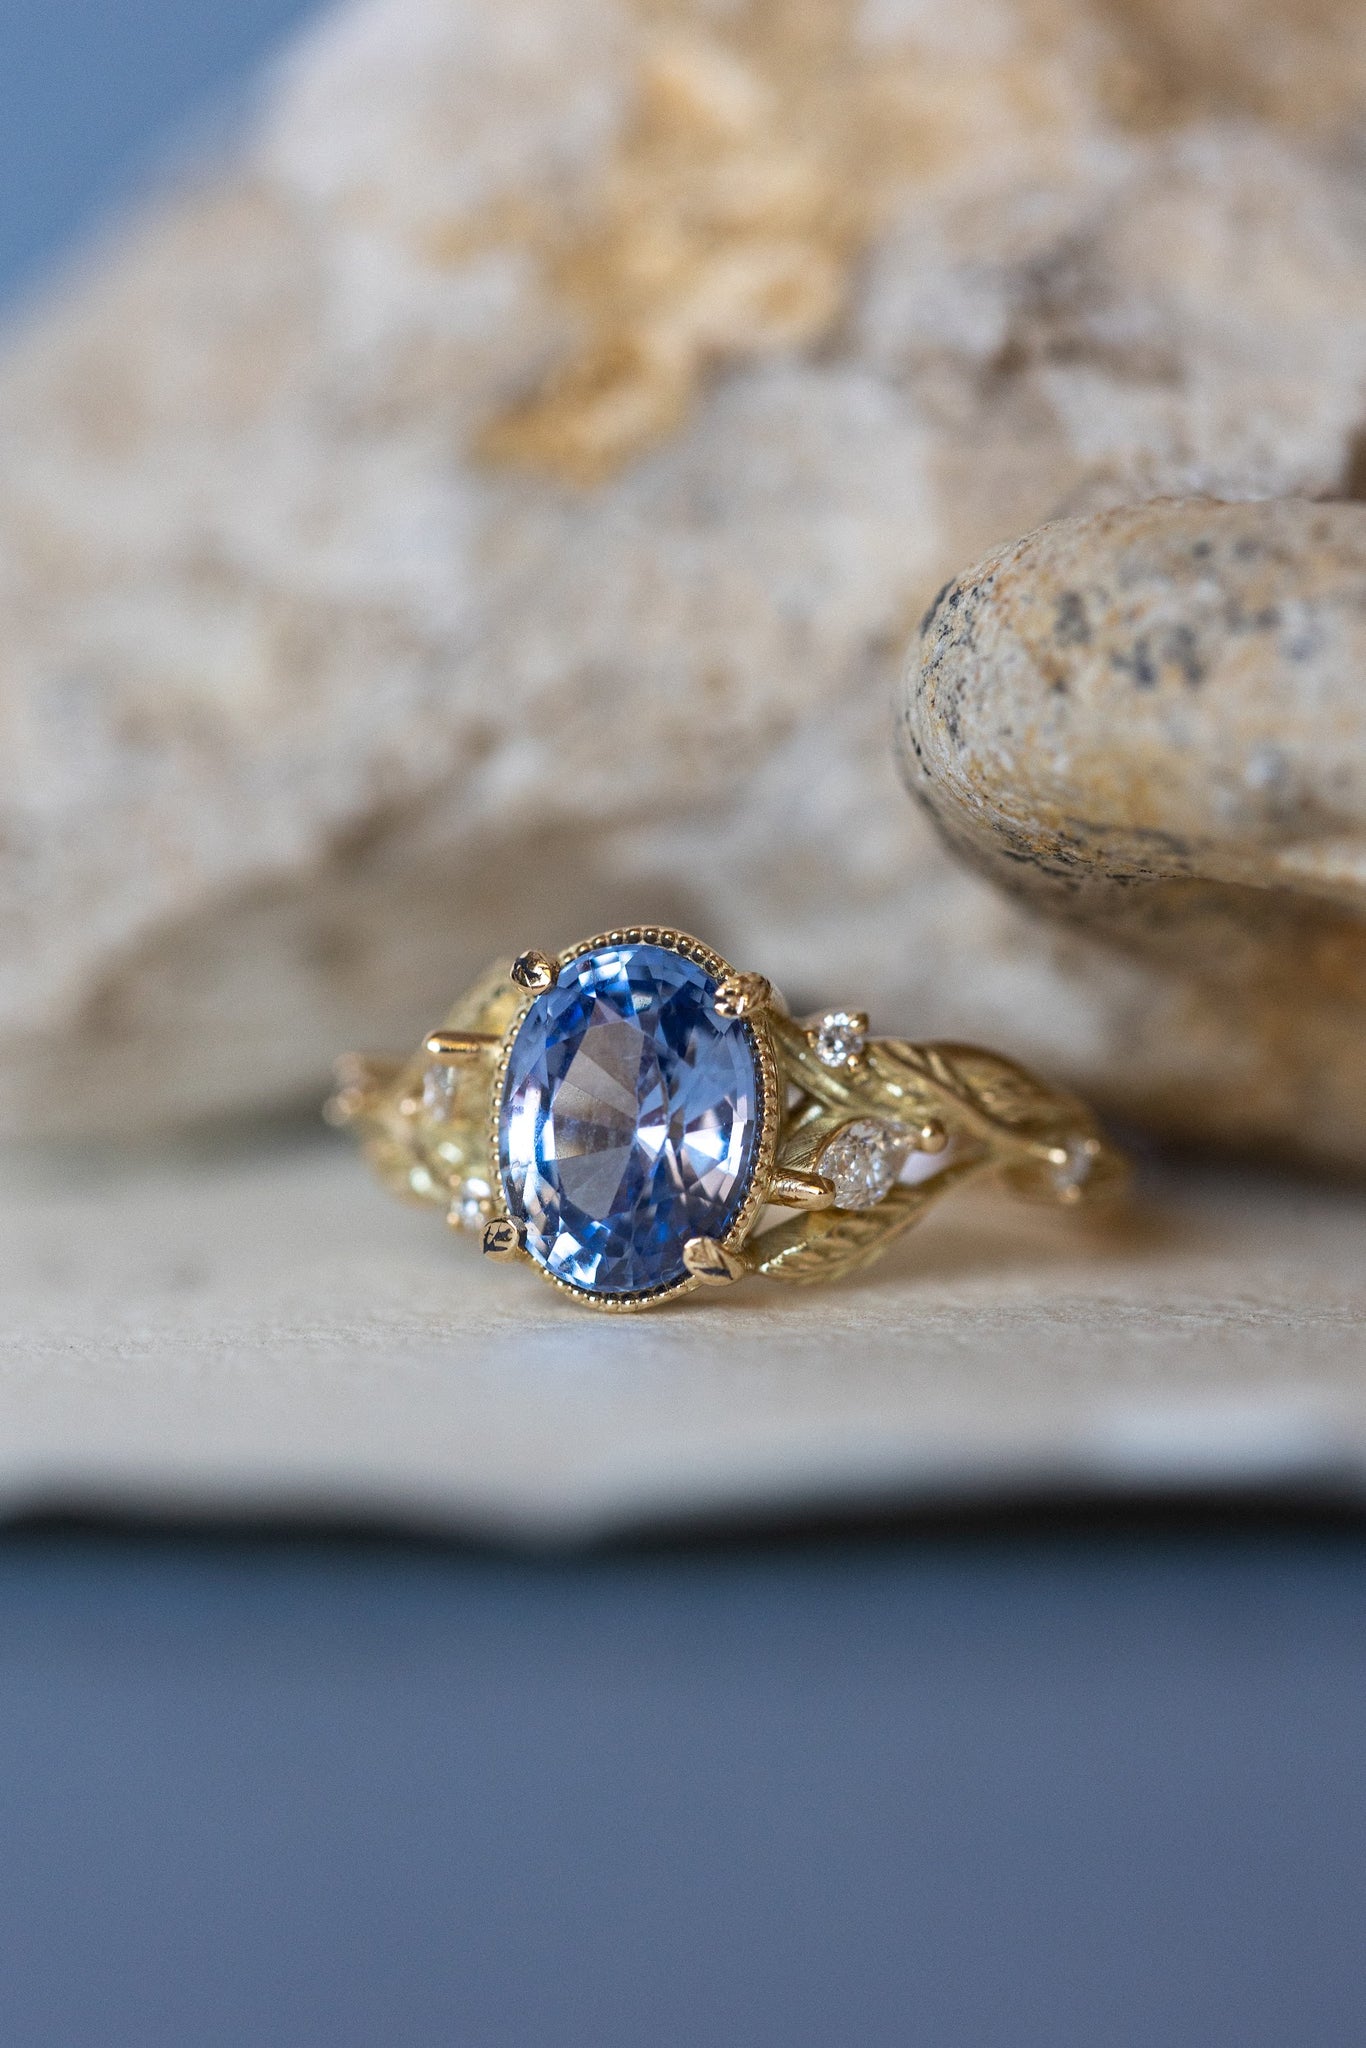 READY TO SHIP: IGI laboratory certified ring in 14K yellow gold with natural sapphire oval cut 8.6x6.6 mm and accent natural diamonds, SIZE 7US - Eden Garden Jewelry™